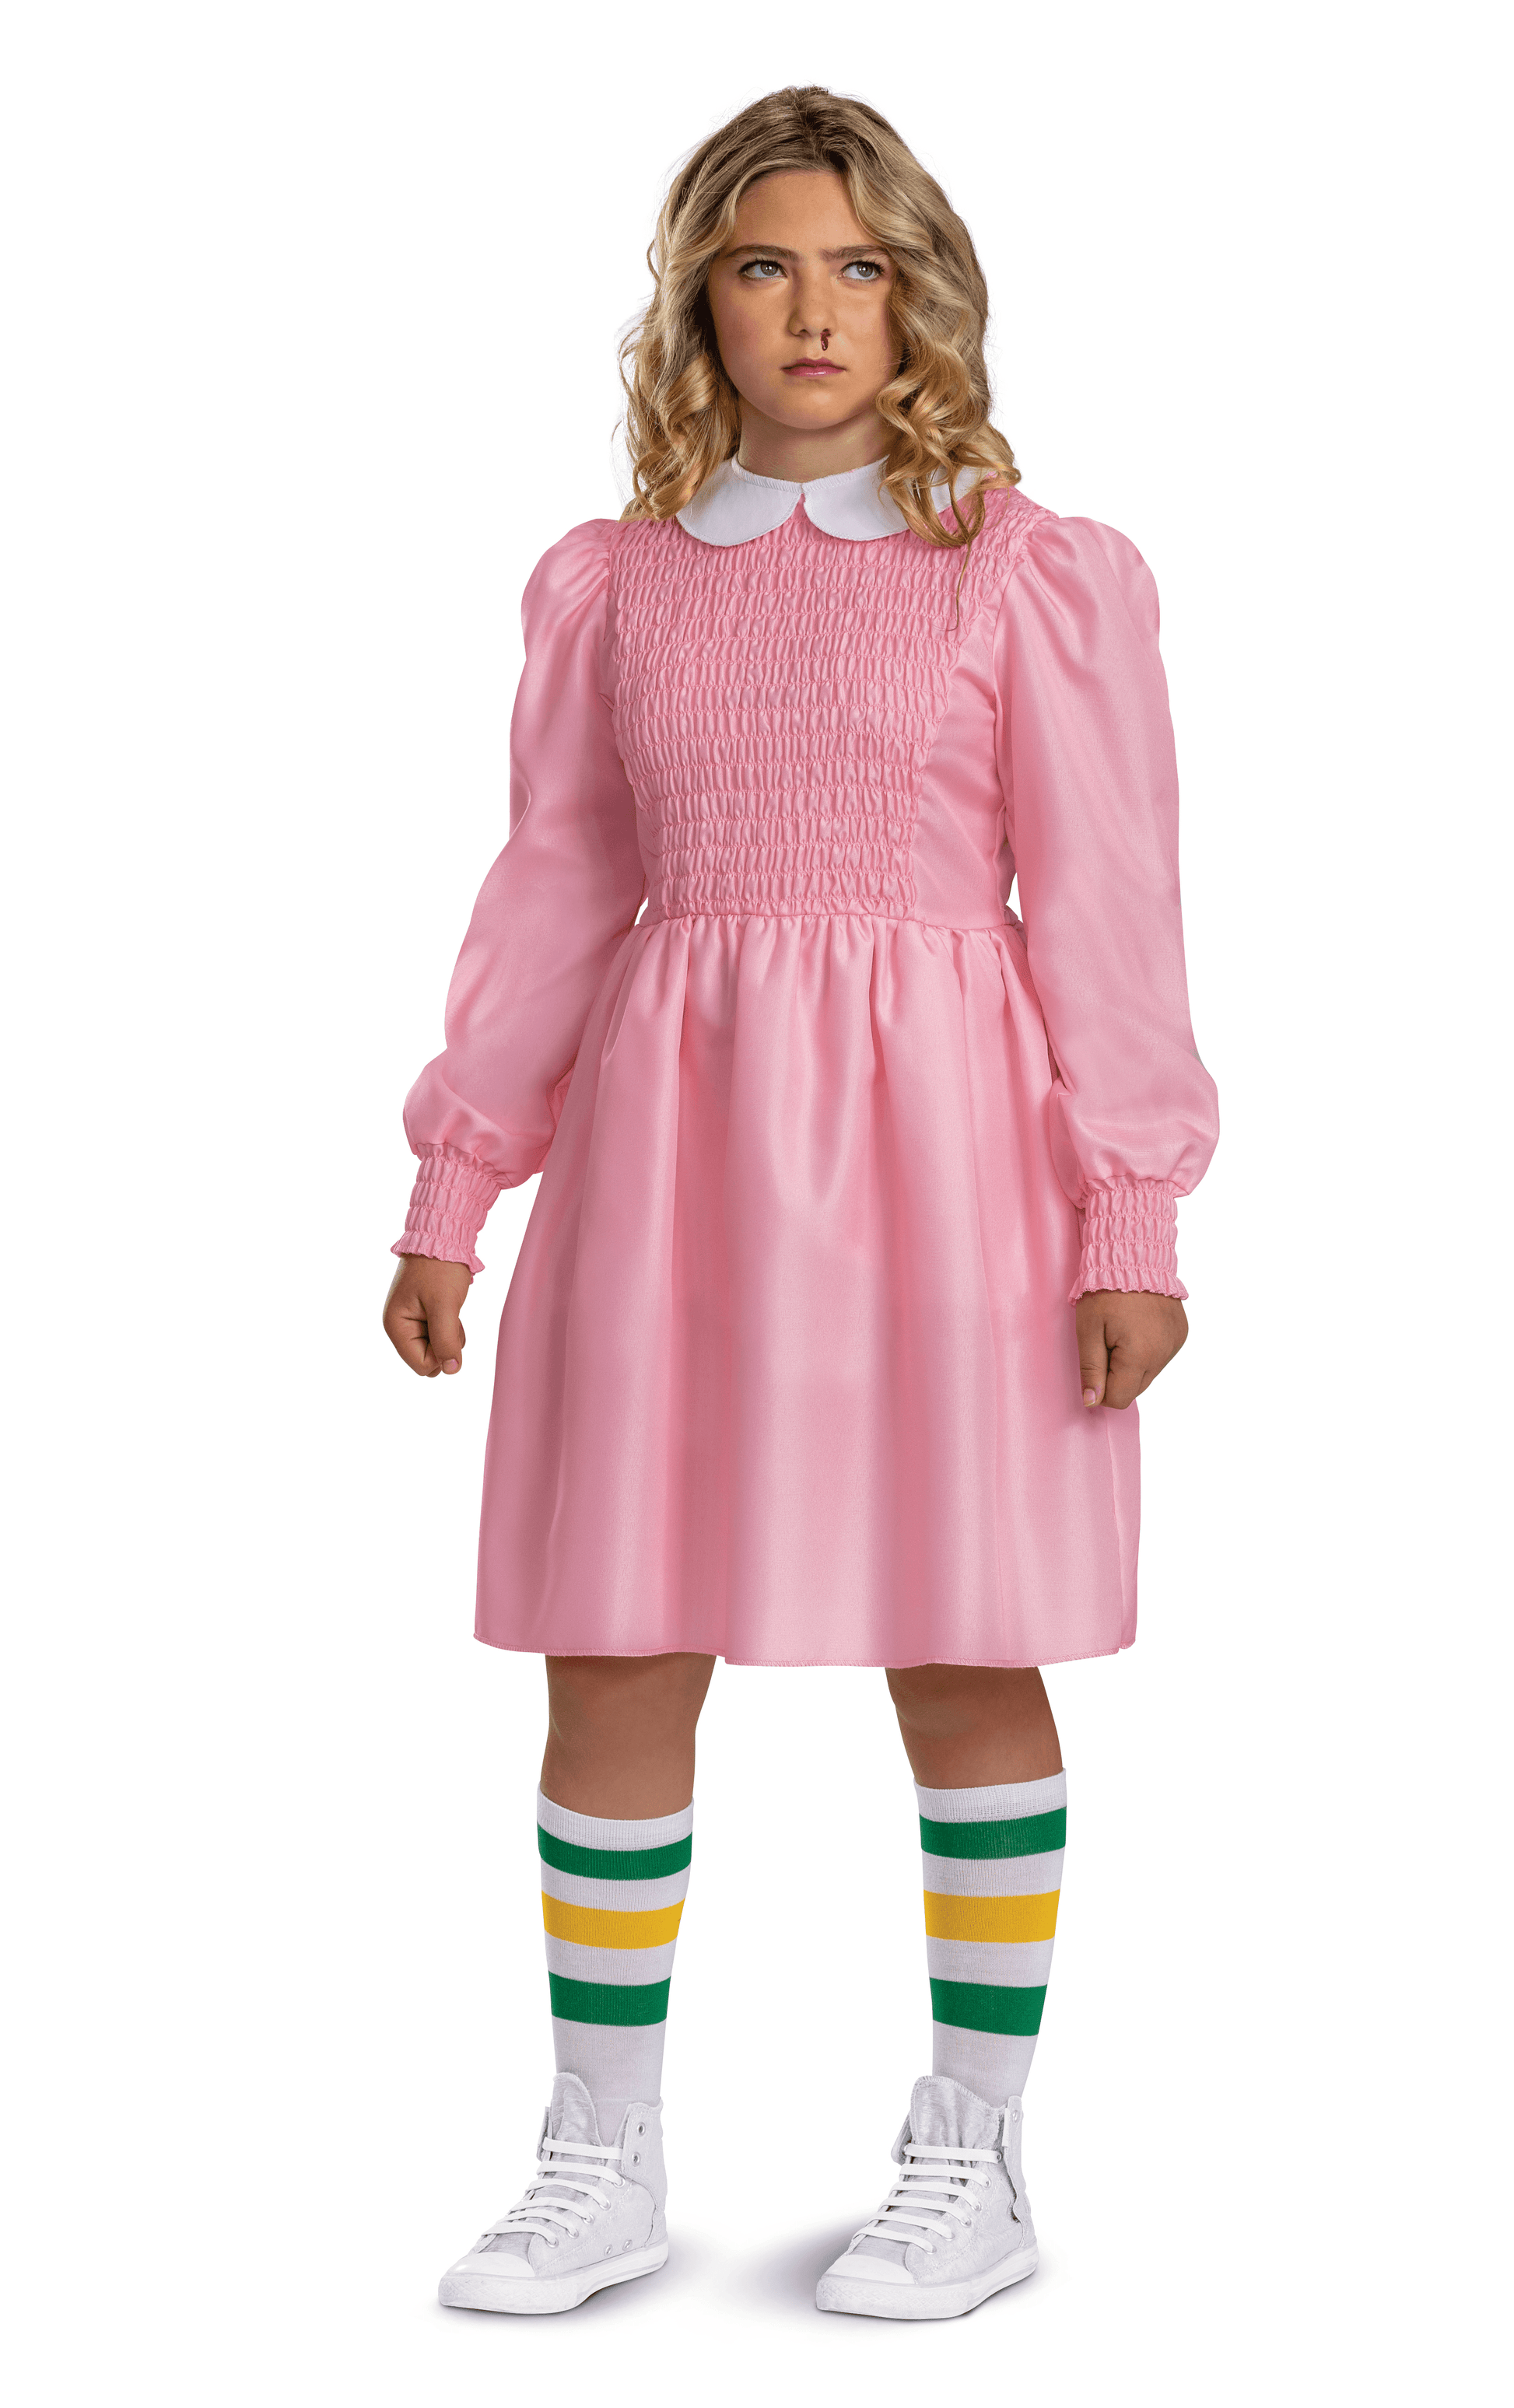 Tween Eleven Classic Pink Dress Costume - Stranger Things - McCabe's Costumes